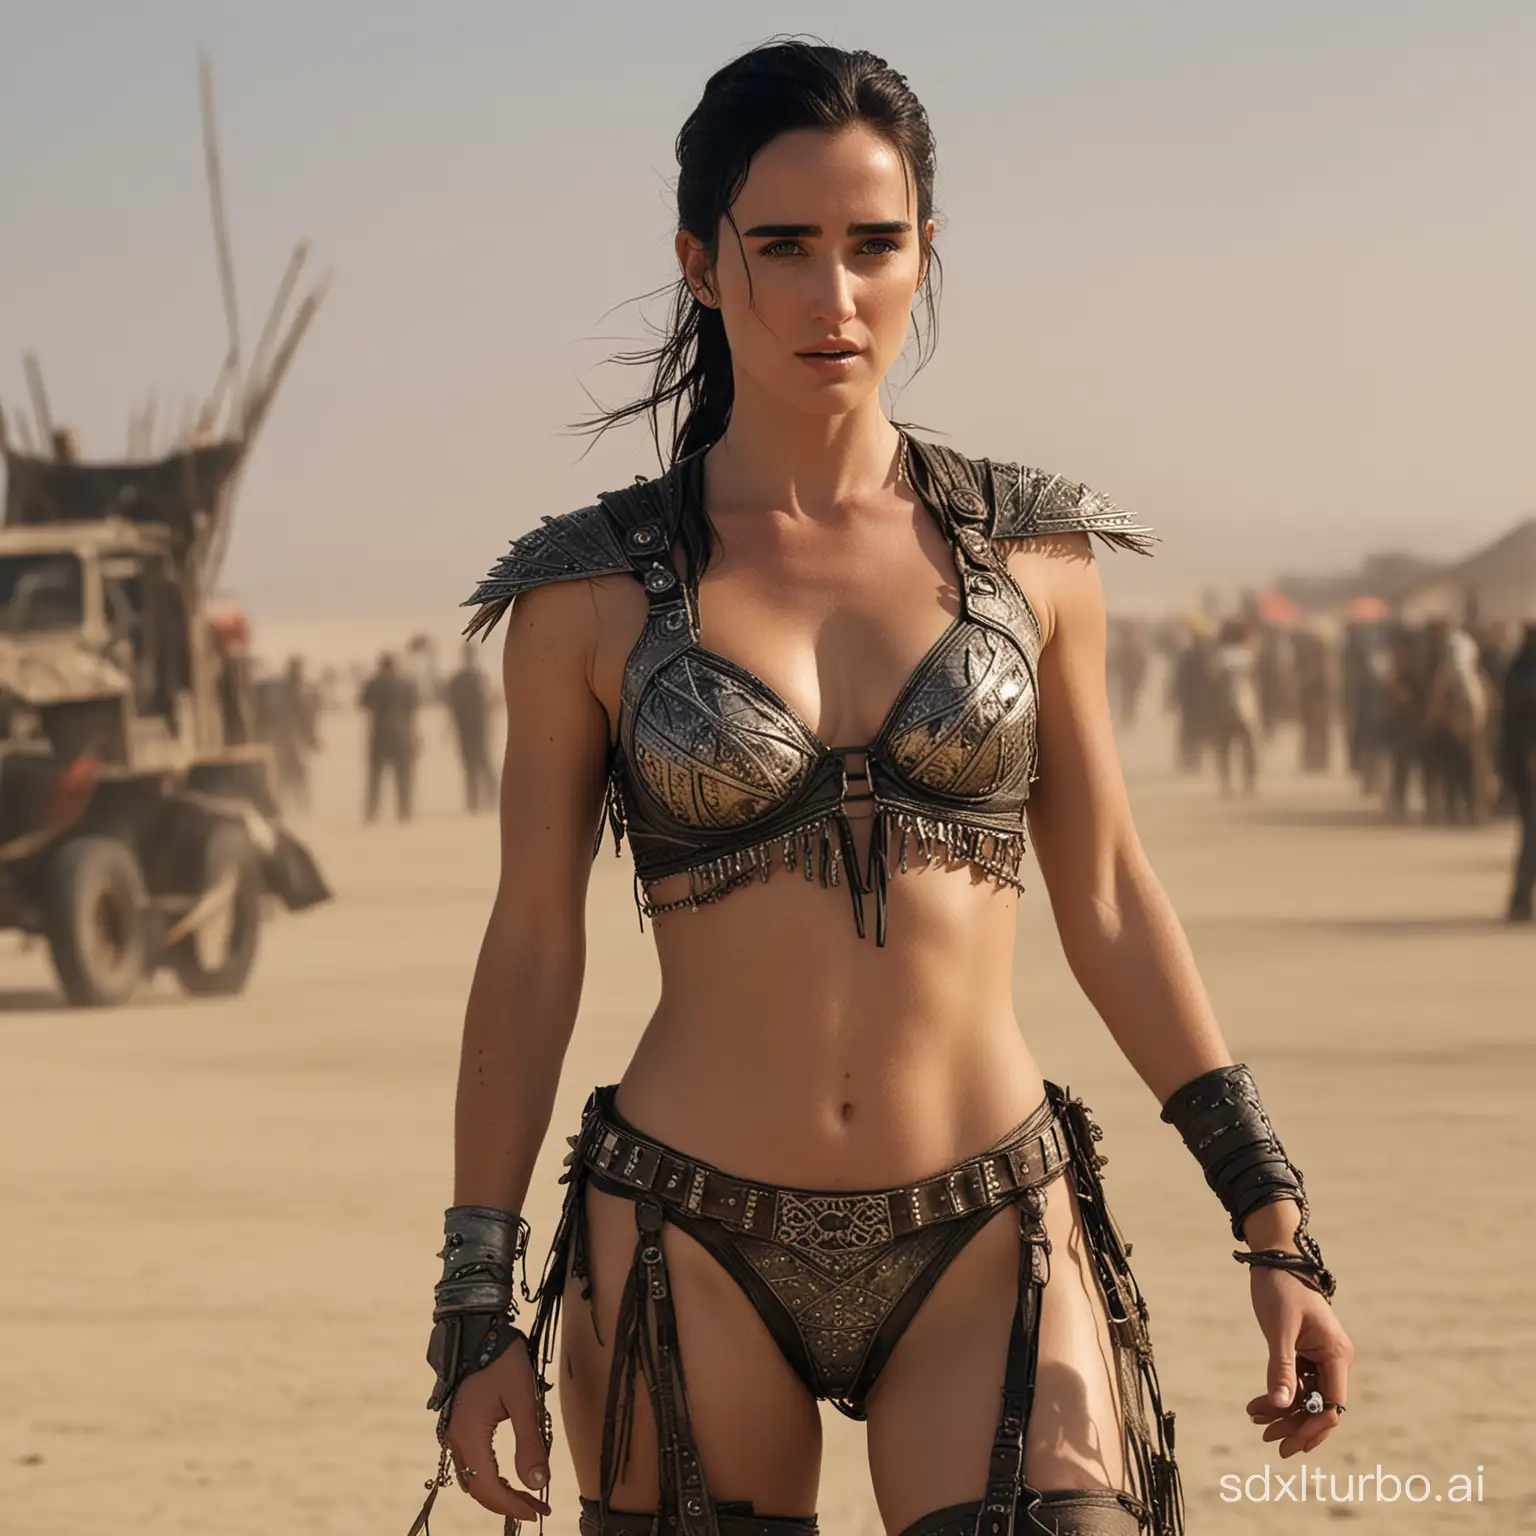 Young-Jennifer-Connelly-in-Revealing-Costume-at-Burning-Man-Festival